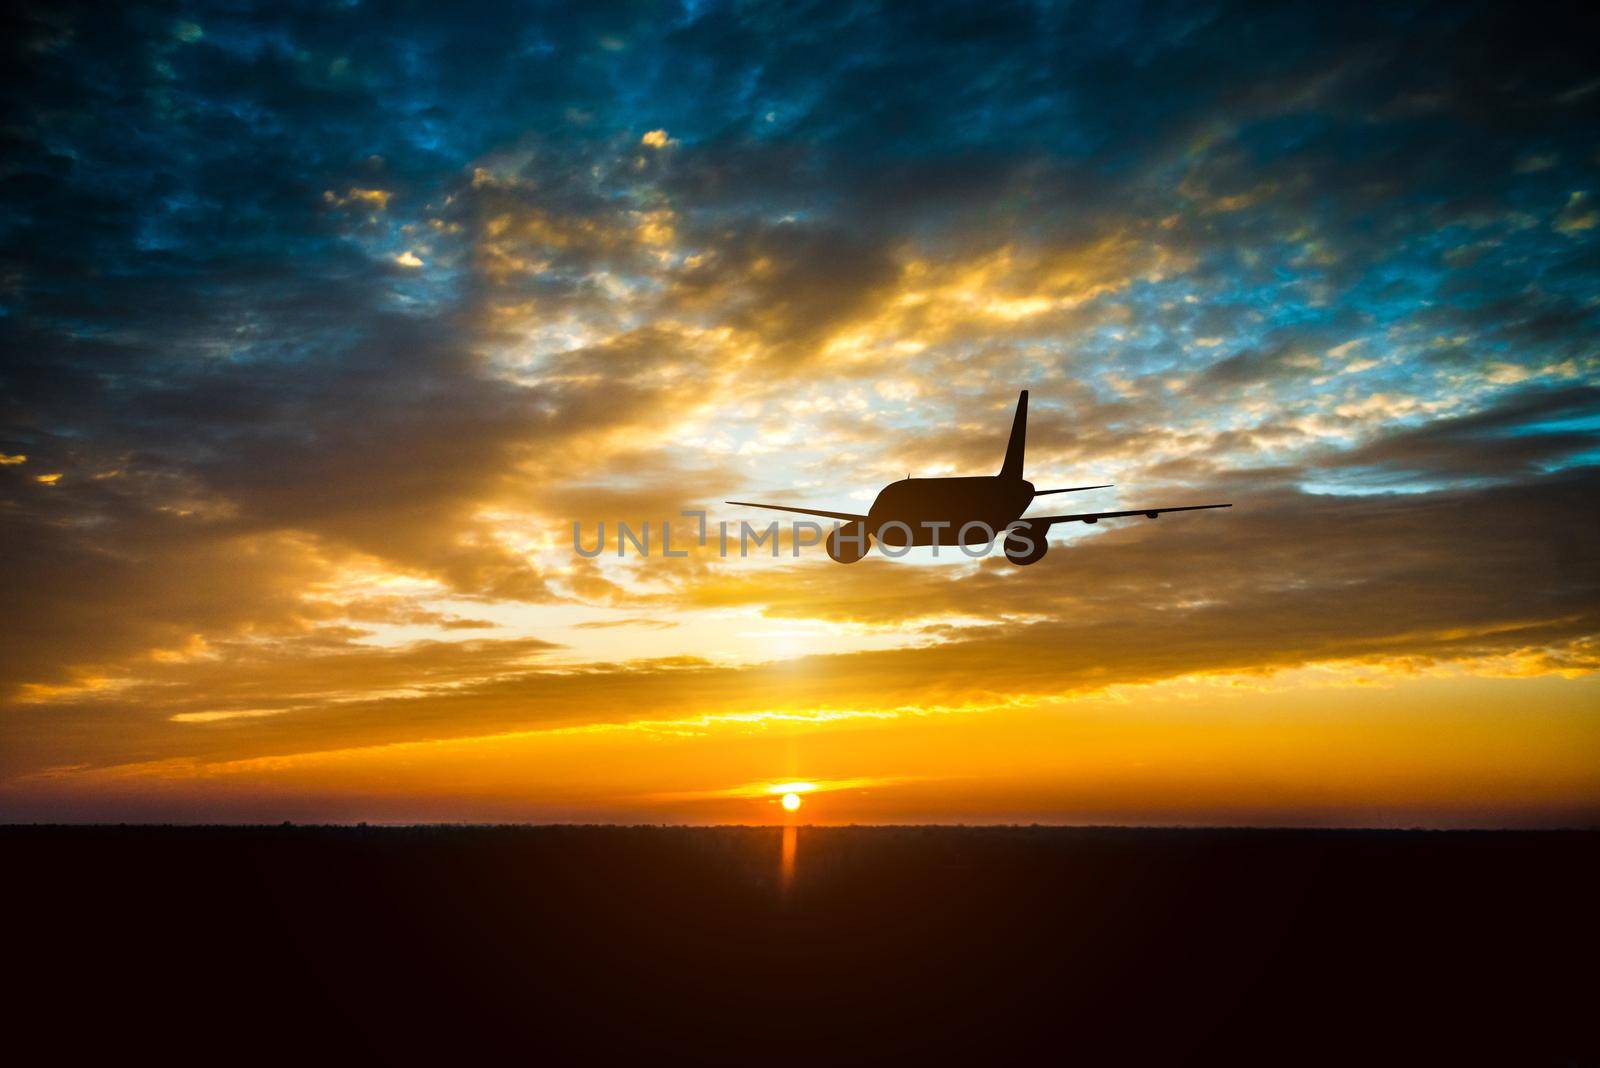 Airplane in the sky at sunset by tan4ikk1